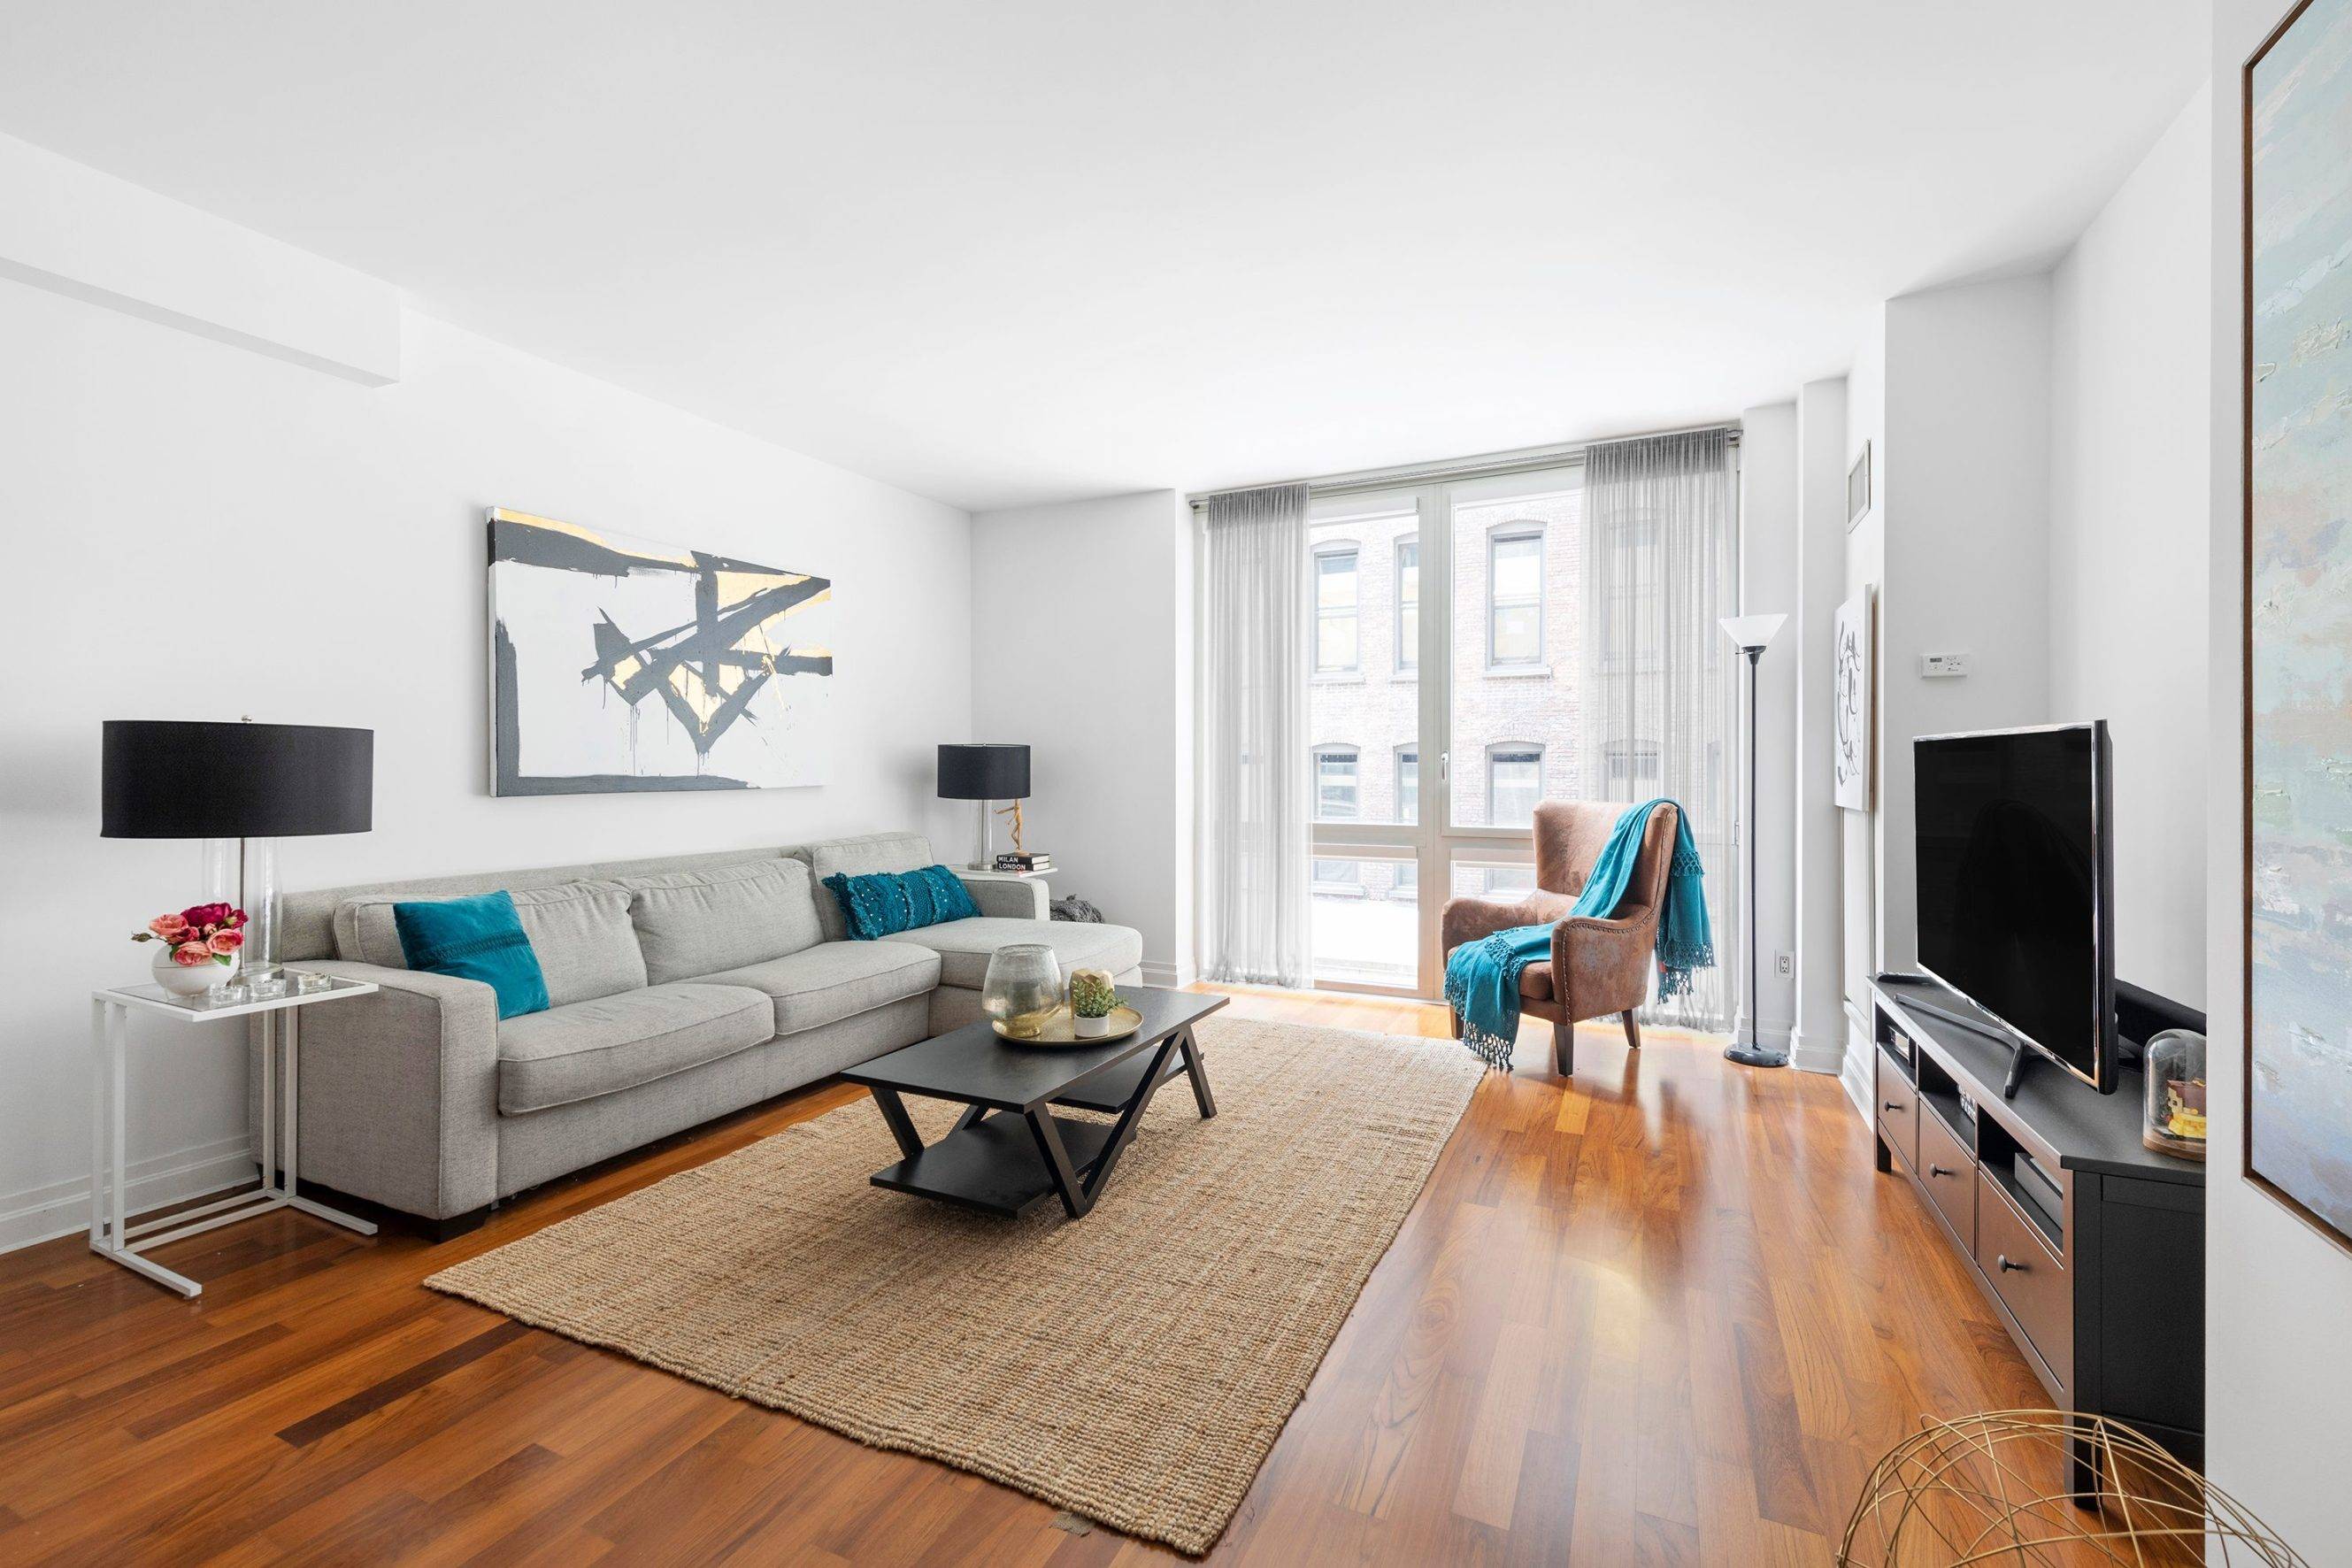 This is a stunning 1 bedroom 1 bath apt with impeccable finishes in the heart of NoMad.